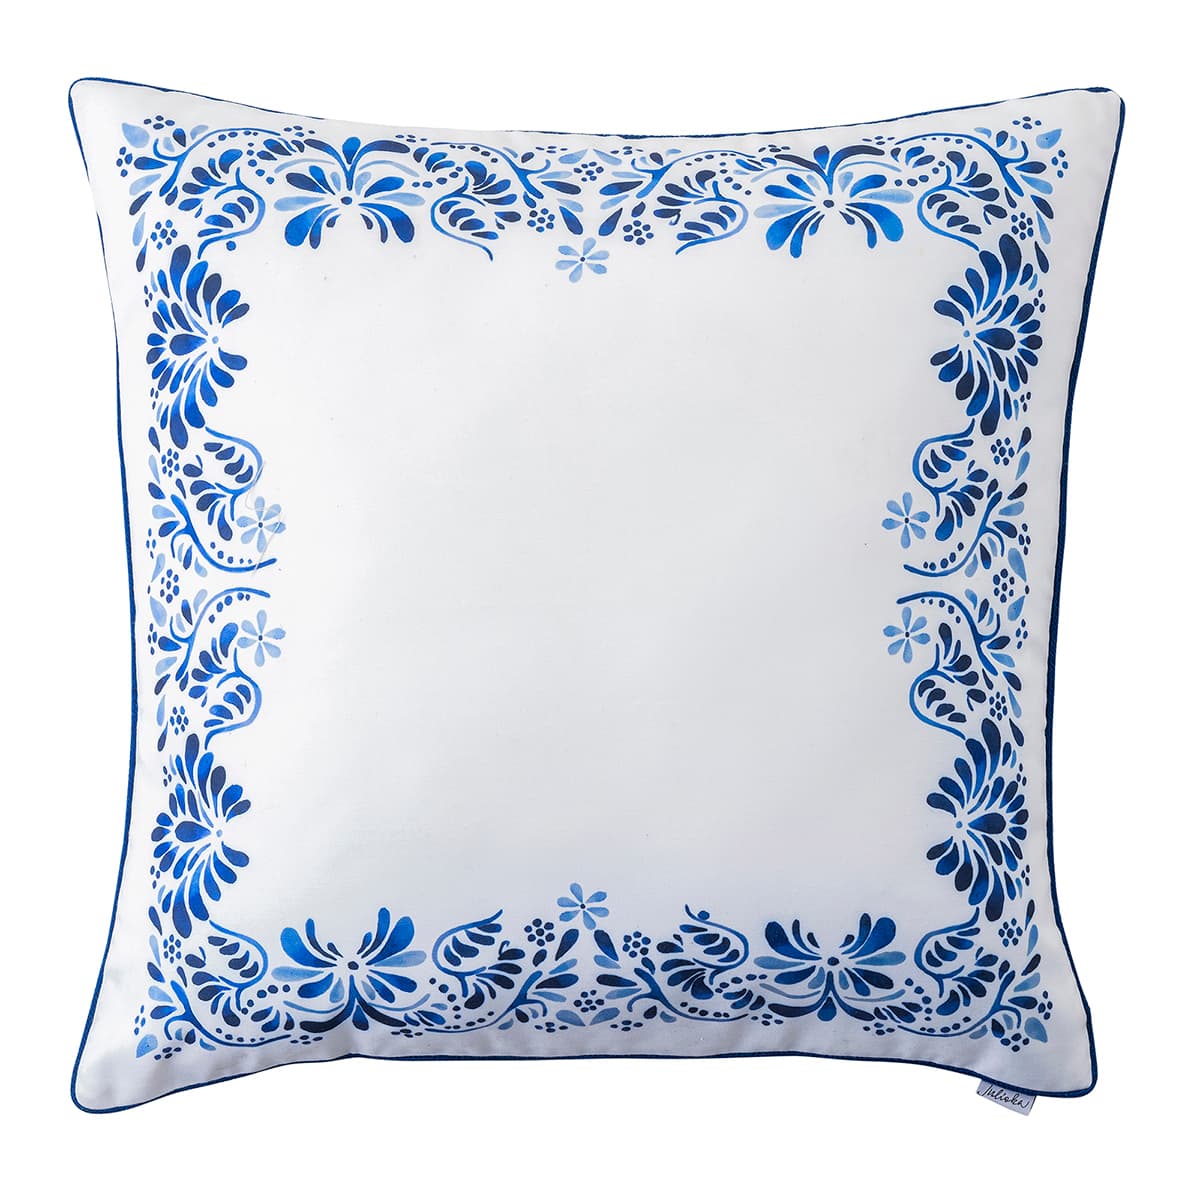 <p>Rimmed in a beautiful cobalt border with motifs from our Iberian Journey dinnerware pieces, this pillow would make a lovely statement on a living room couch or on a guest room bed. Stuffed with 10% down and 90% feather fill.</p>